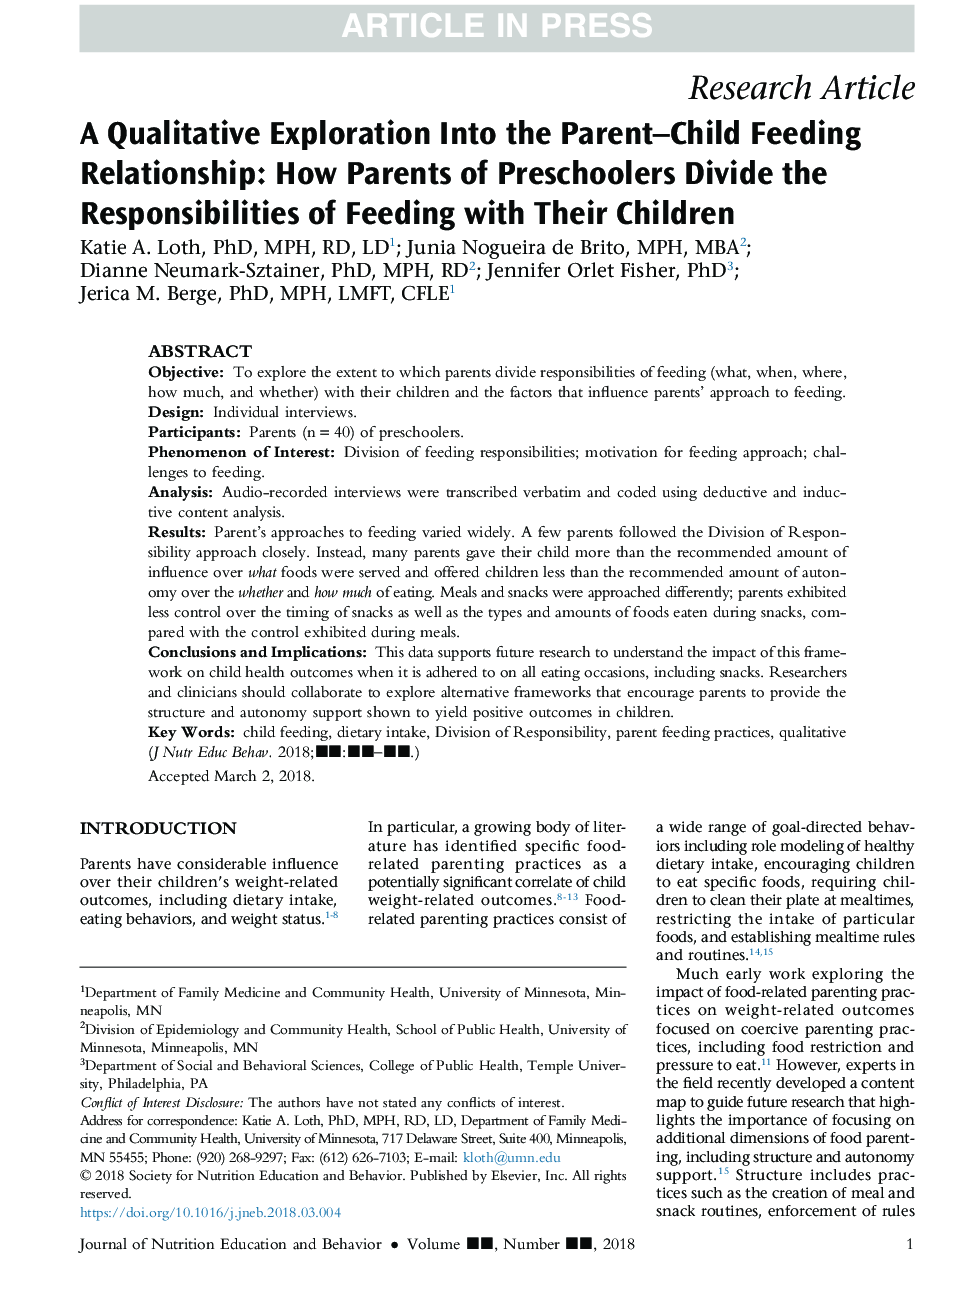 A Qualitative Exploration Into the Parent-Child Feeding Relationship: How Parents of Preschoolers Divide the Responsibilities of Feeding With Their Children